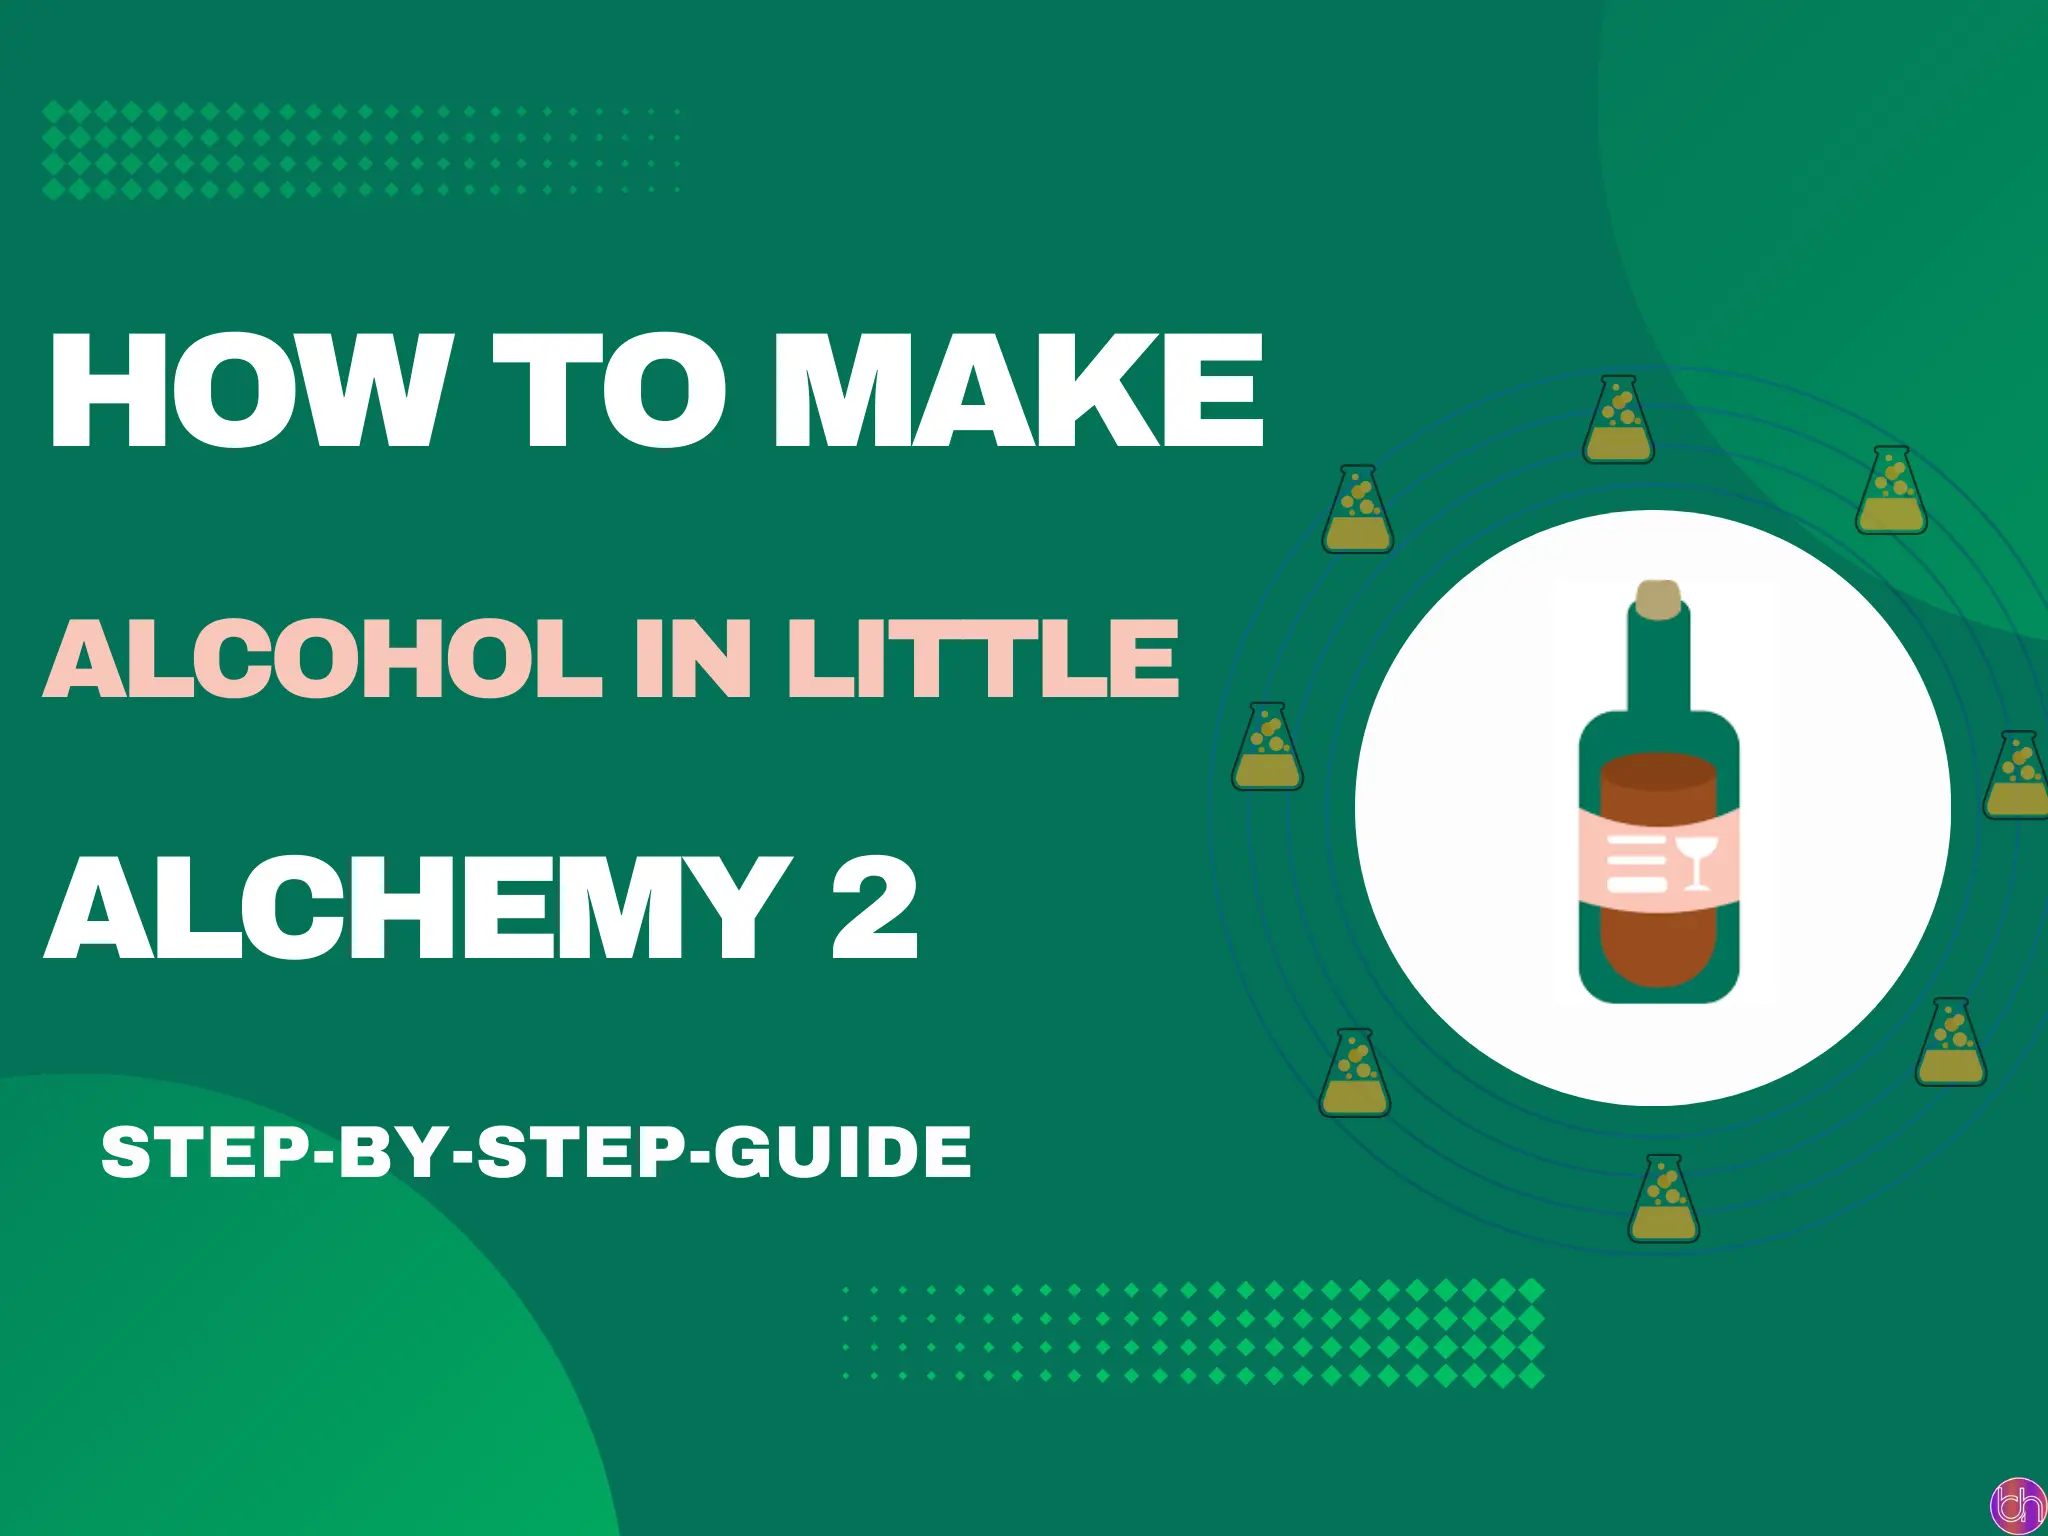 How to make Alcohol in little alchemy 2